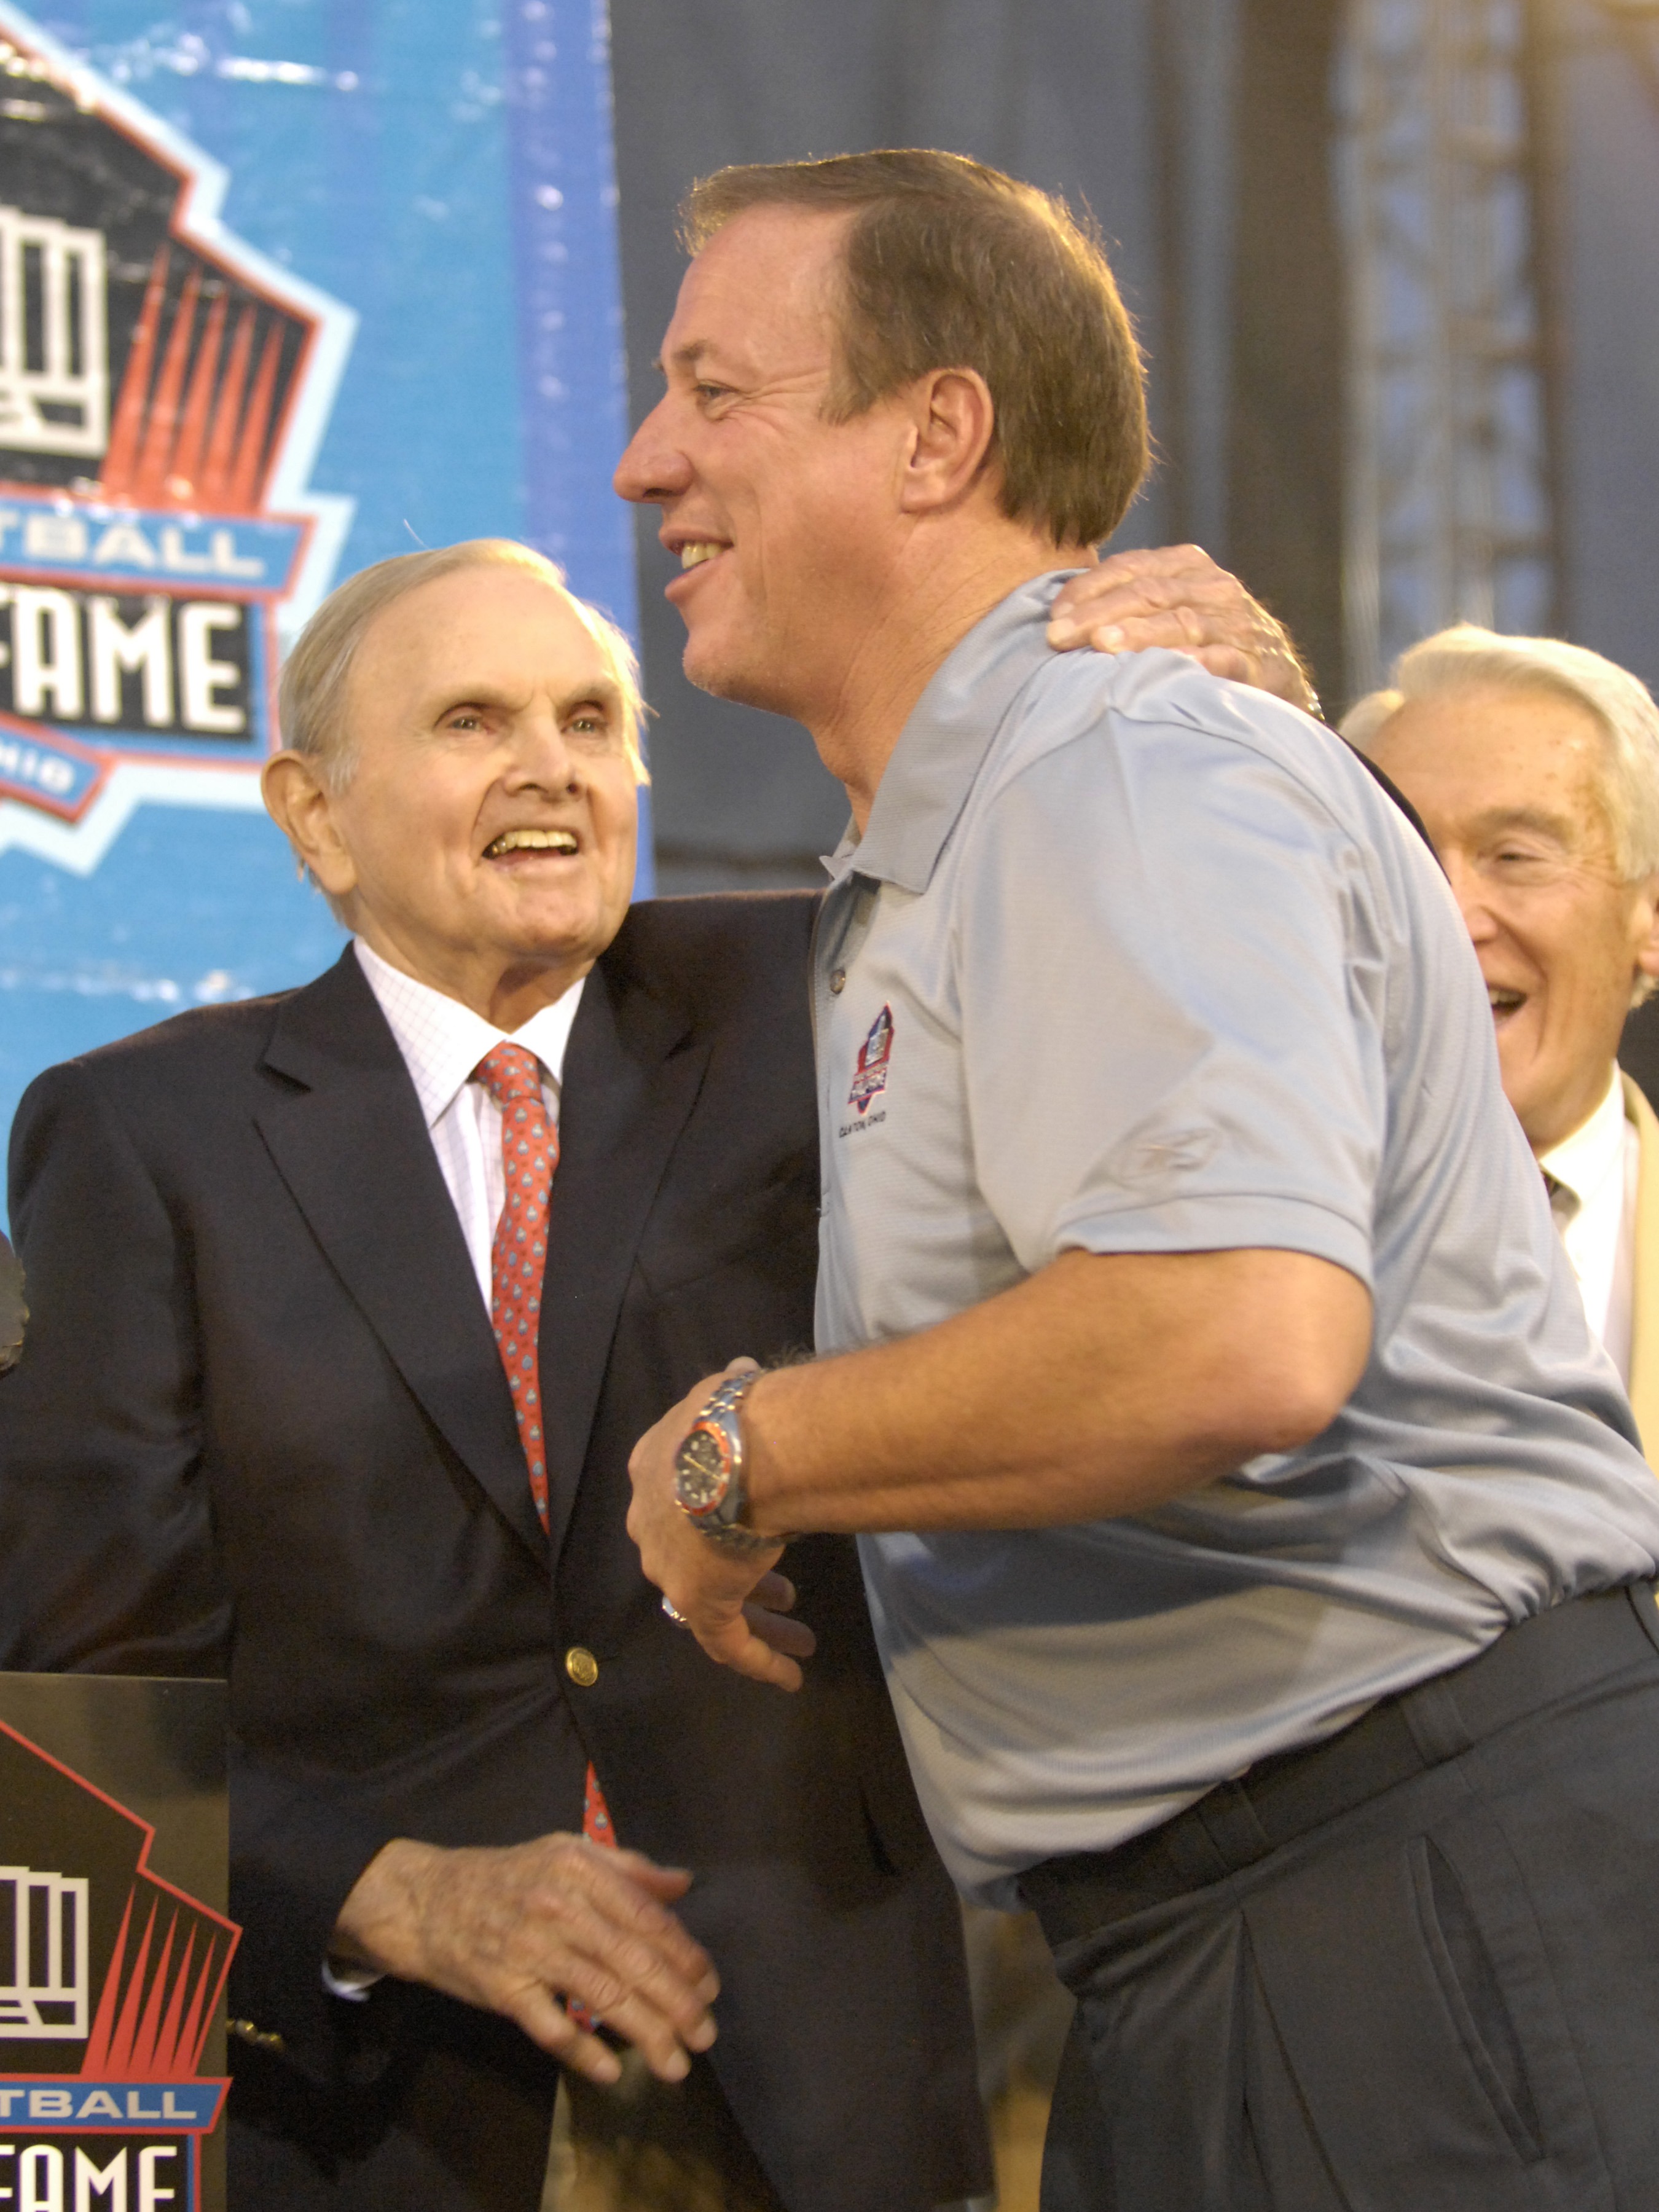 CANTON, OH - AUGUST 04:  Buffalo Bills owner Ralph Wilson (L) and retired quarterback Jim Kelly hug during the Class of 2007 Pro Football Hall of Fame Enshrinement Ceremony August 4, 2007 in Canton, Ohio. (Photo by Al Messerschmidt/Getty Images)